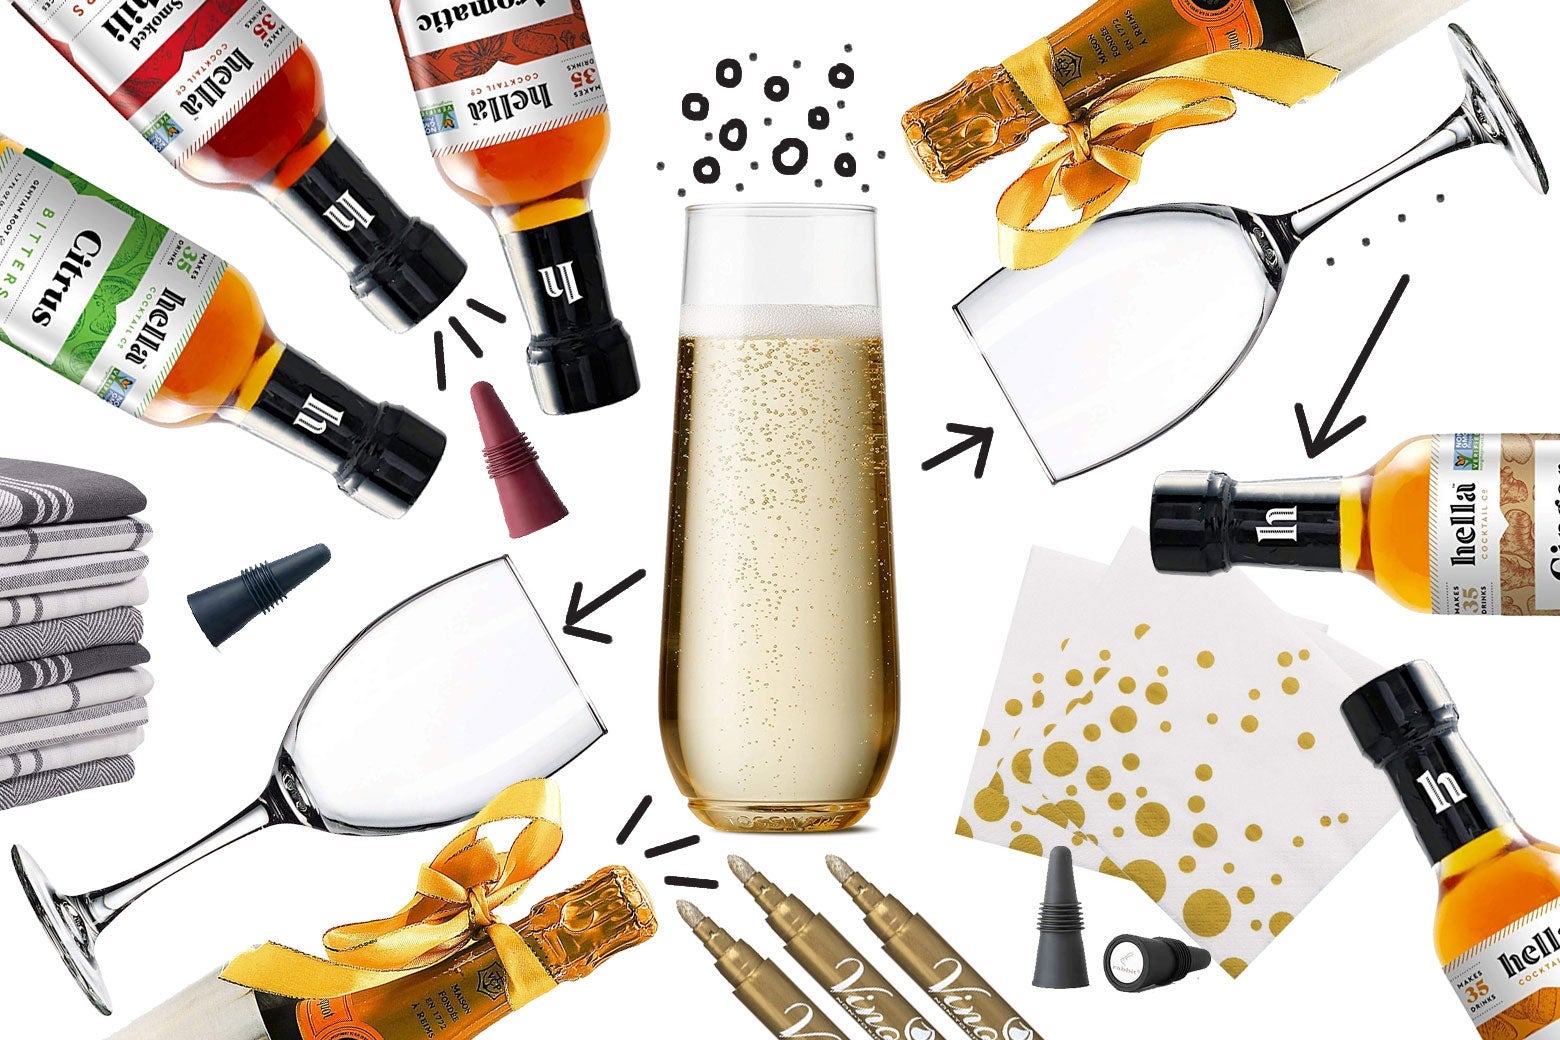 Champagne cocktails worthy of the holidays.